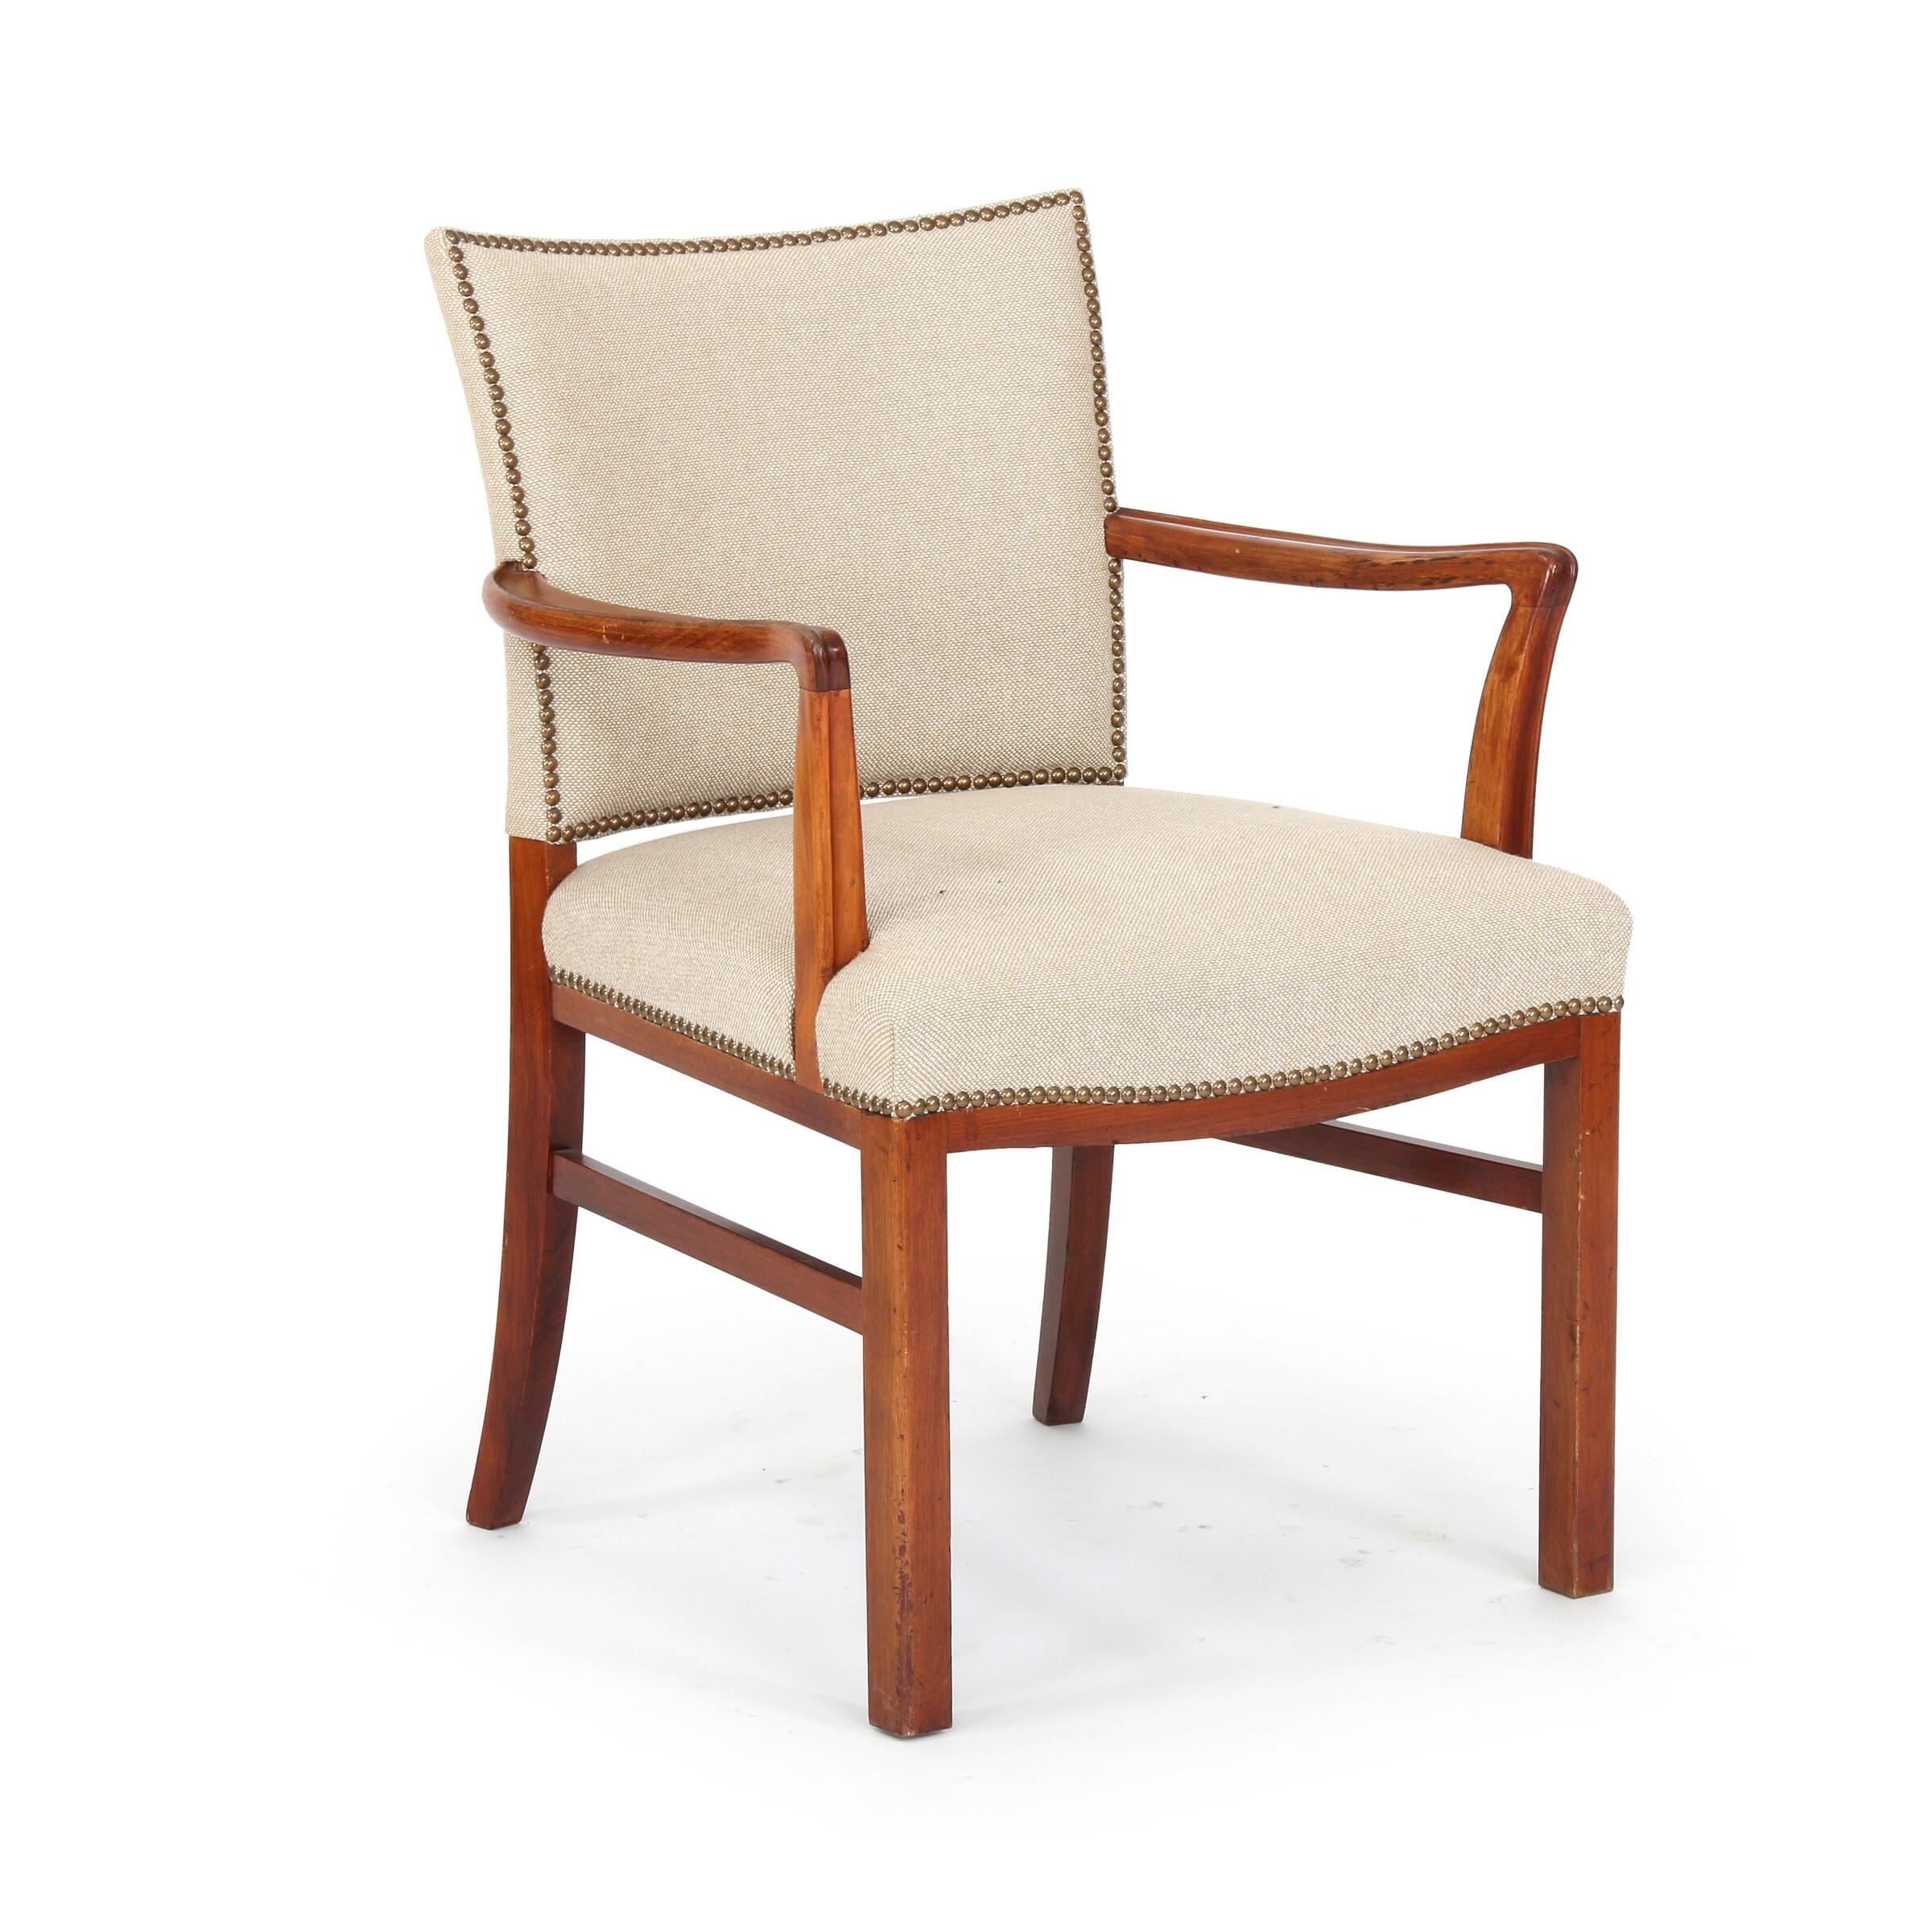 A set of Danish mahogany dining chairs comprised of four side chairs and two armchairs in the manner of Kaare Klint attributed to Jacob Kjaer. The chairs reupolstered in a oatmeal colored wool fabric with close-nailed decoration, circa 1940s. Side